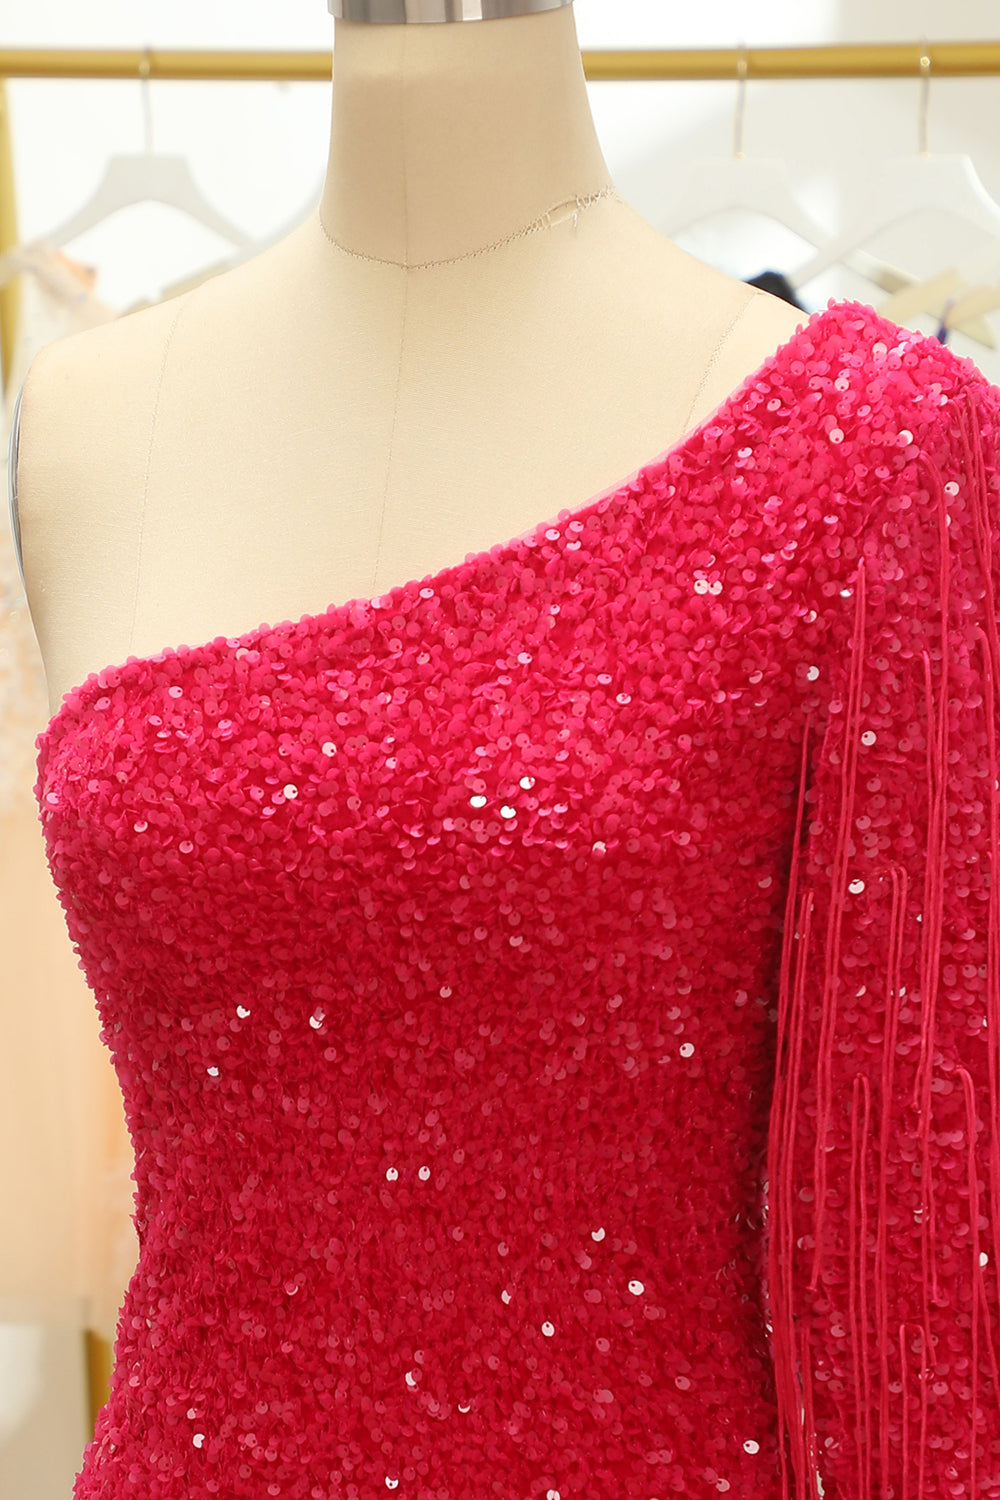 Fuchsia One Shoulder Sequined Tight Homecoming Dress with Fringes